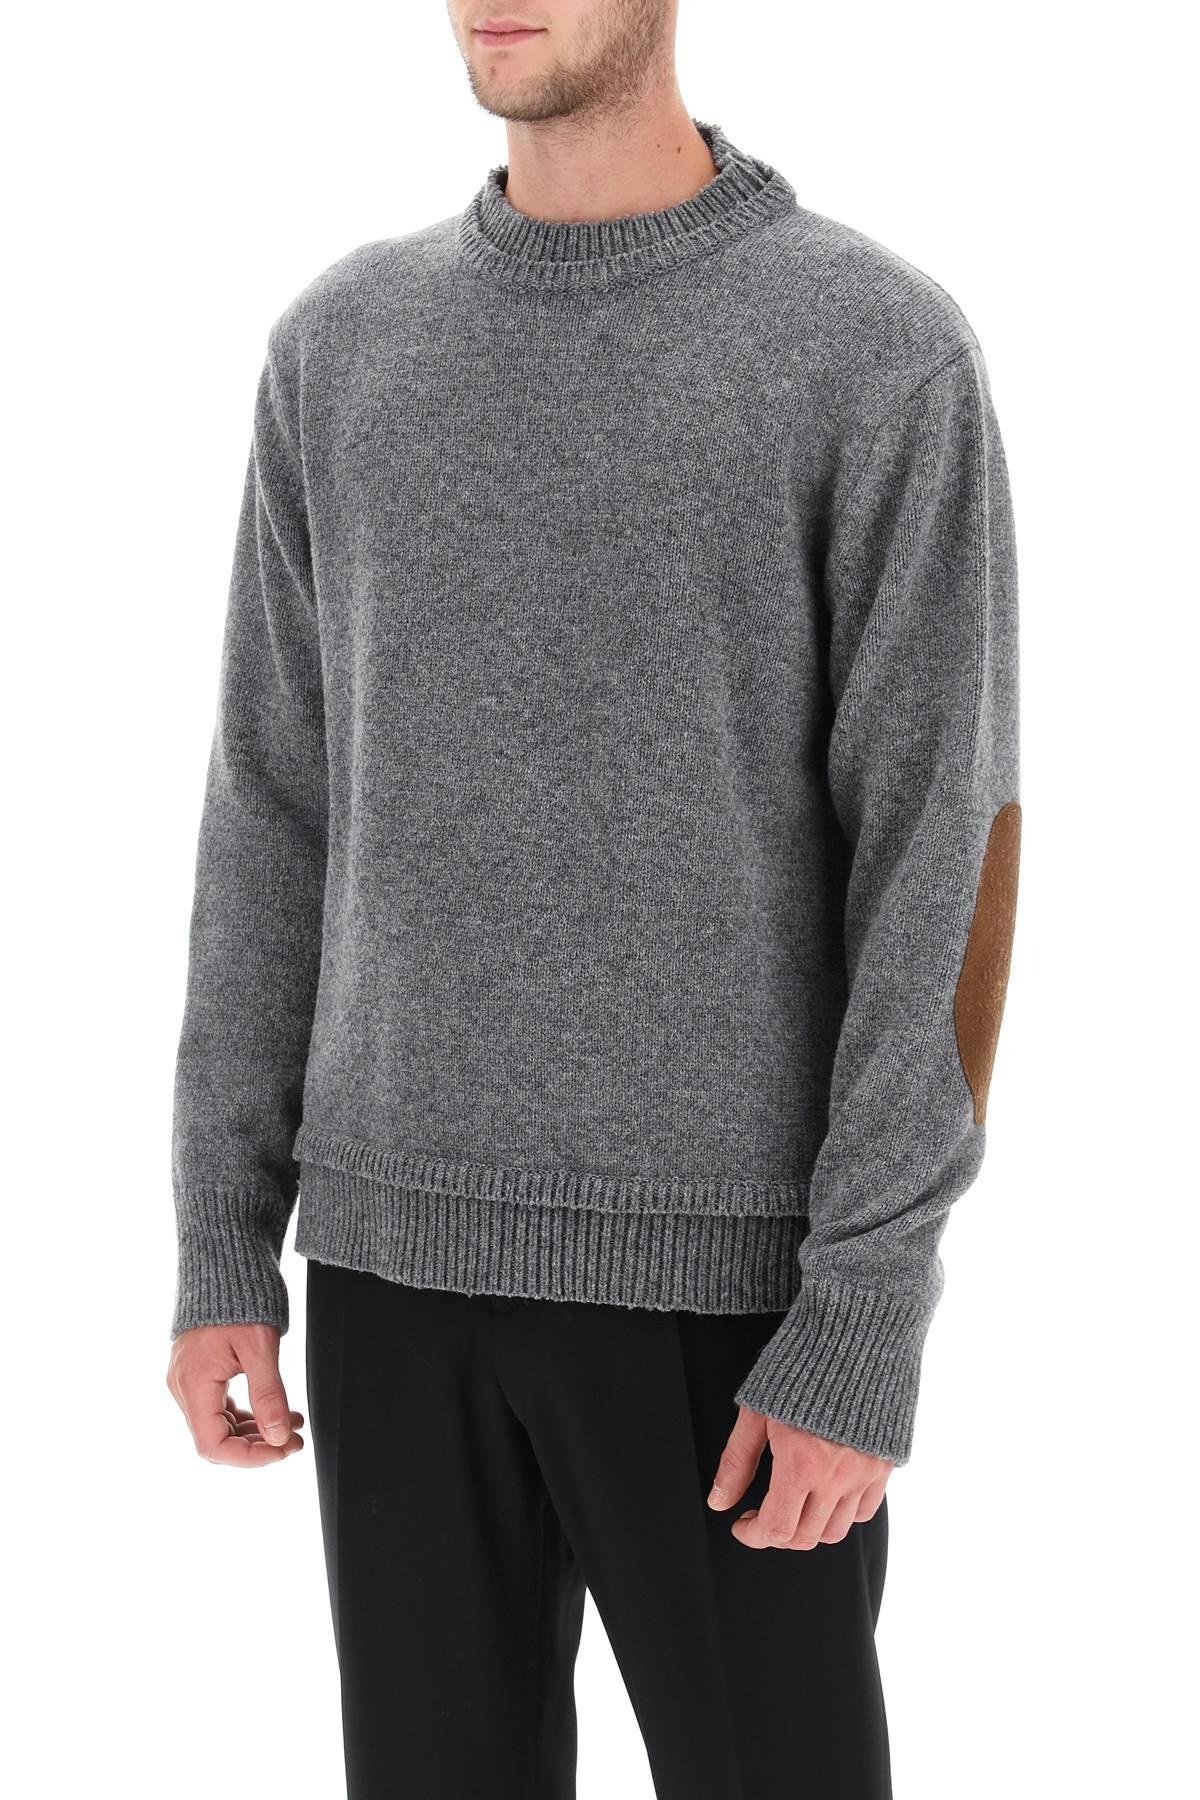 CREW NECK SWEATER WITH ELBOW PATCHES - 5